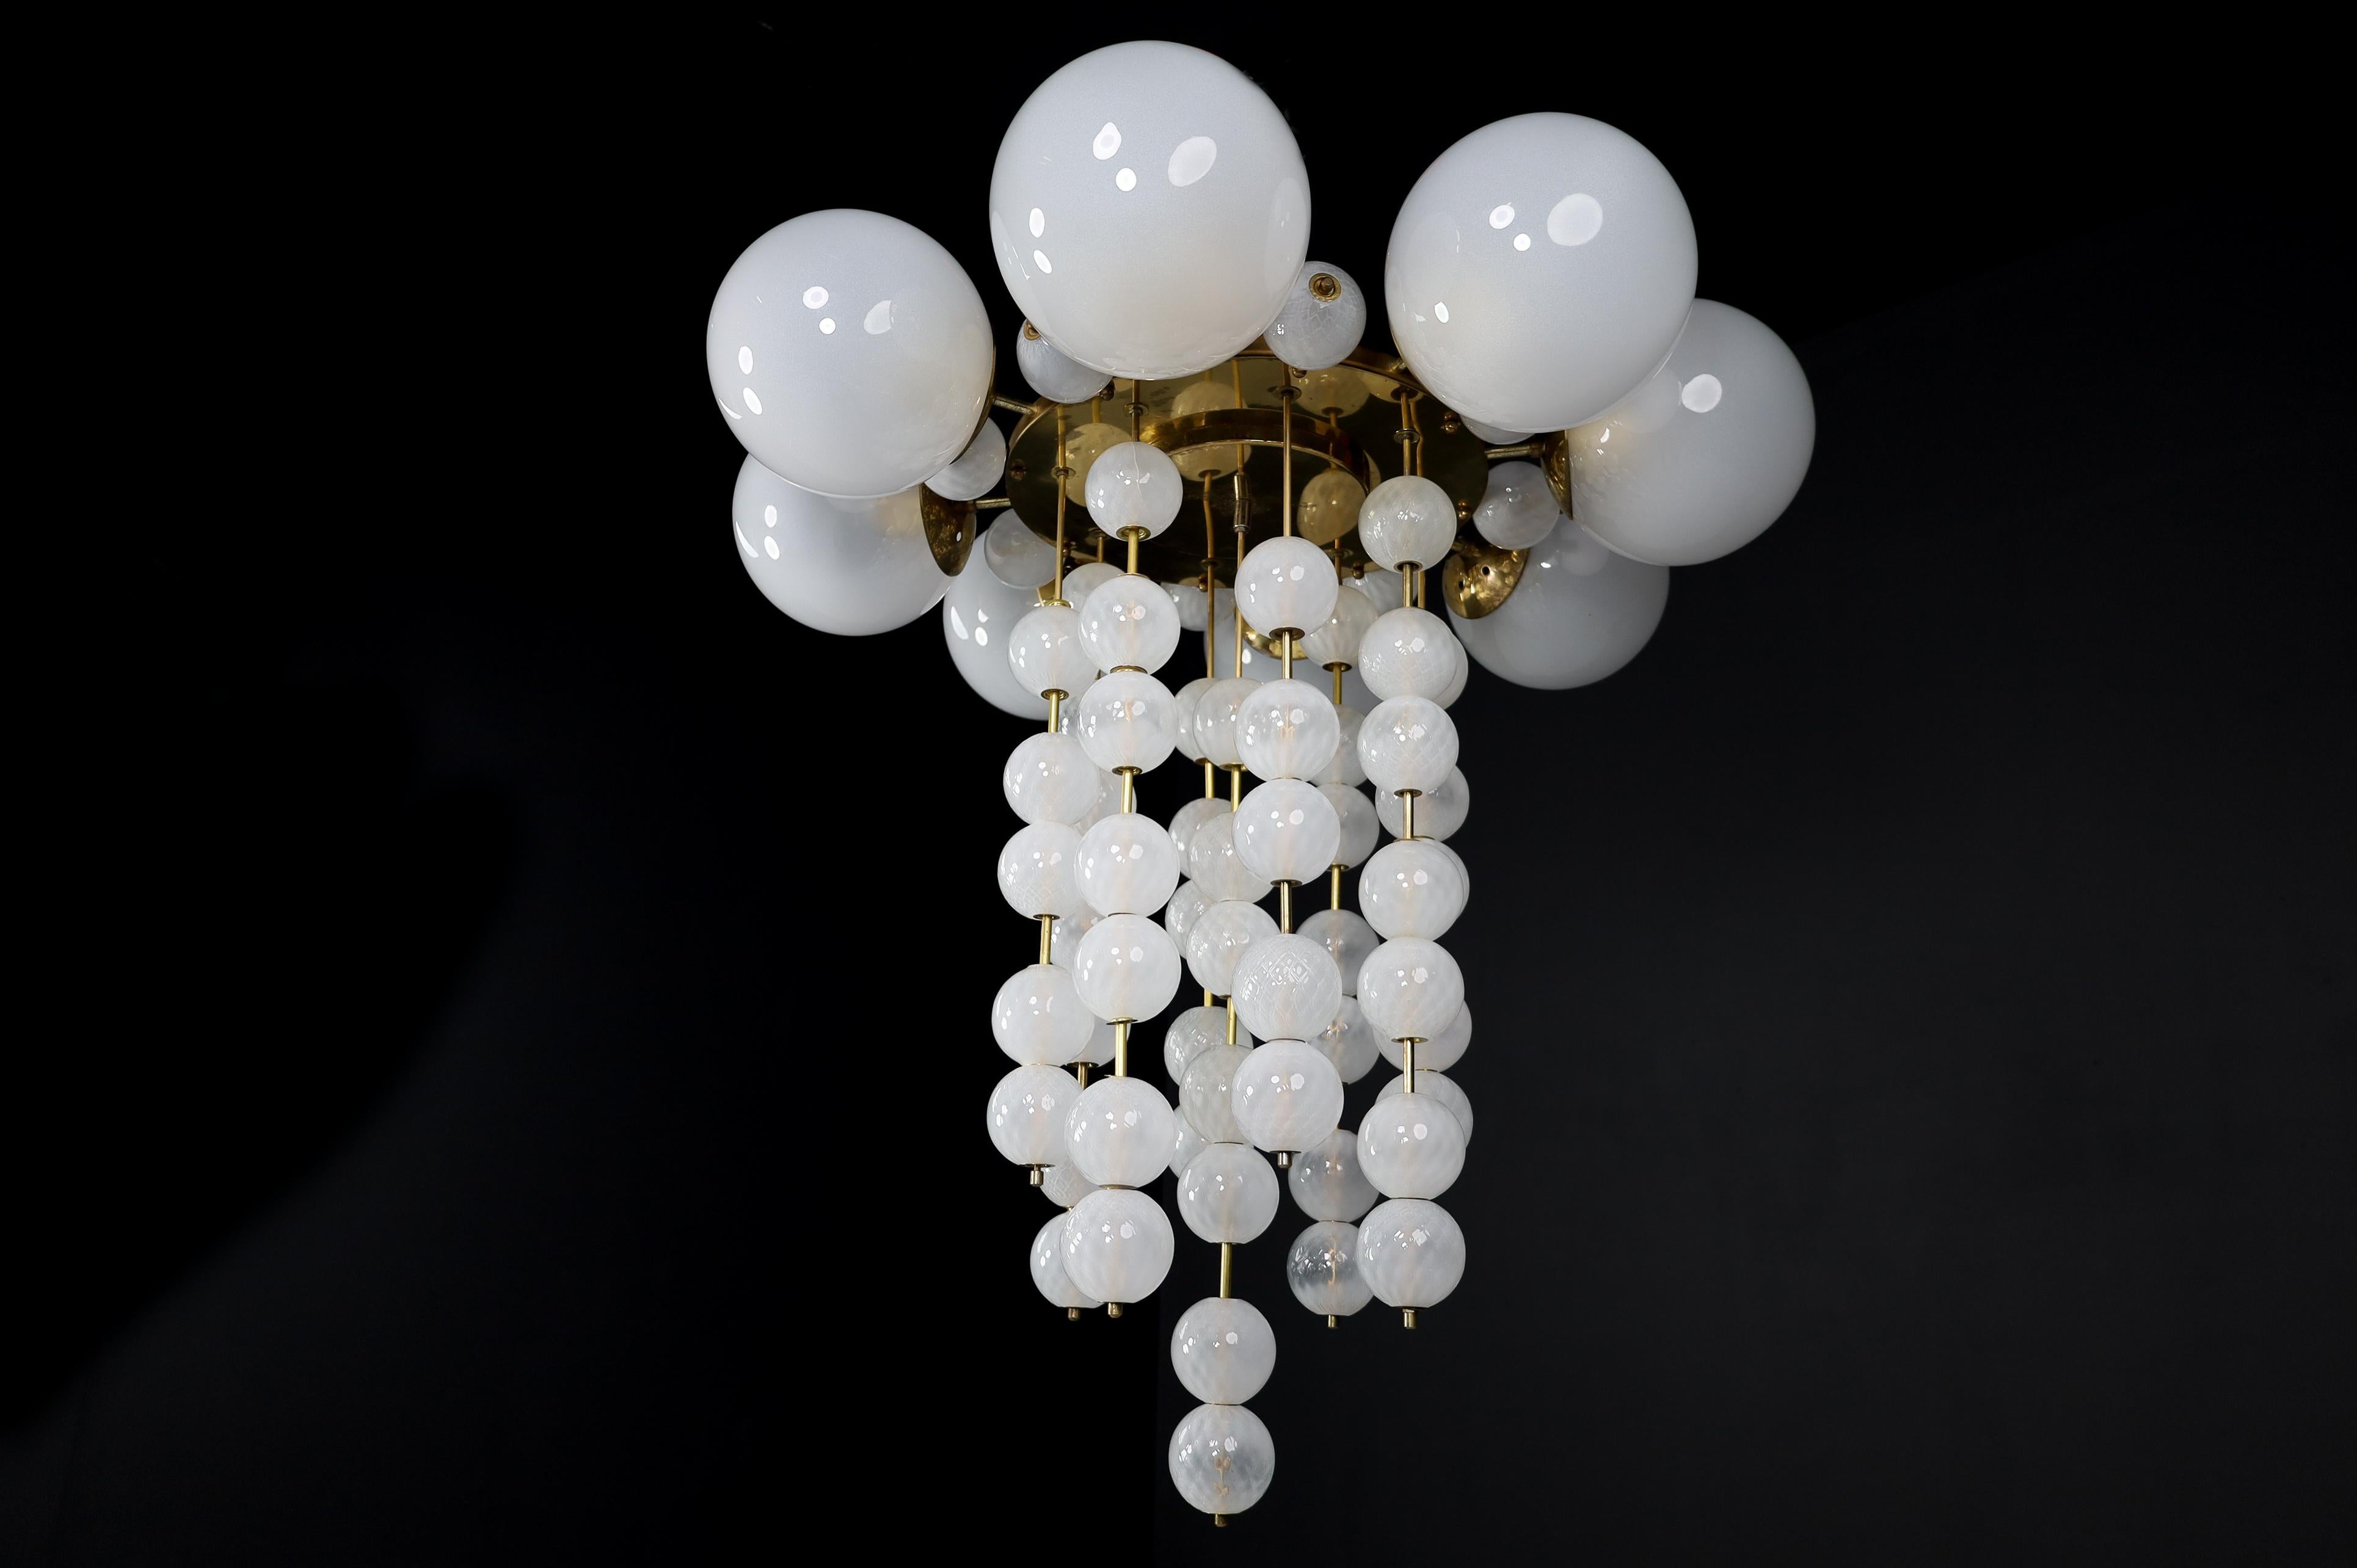 Grand Chandelier with Brass Fixture and Hand-blowed Frosted Glass Globes, 1960s For Sale 2